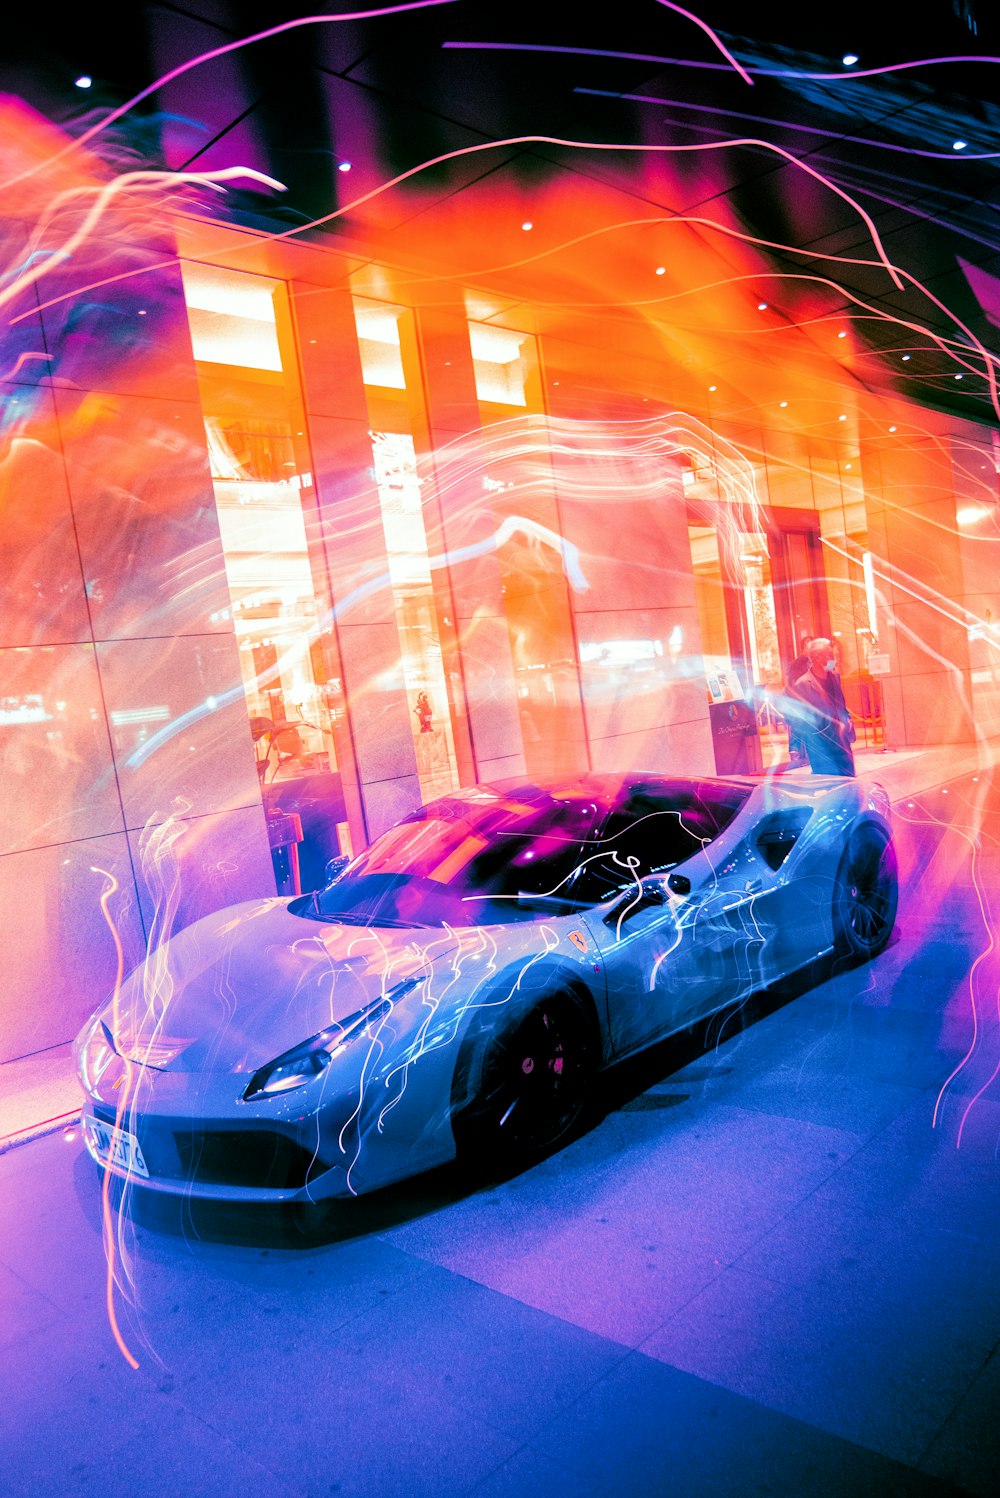 a futuristic car is shown in a room with neon lights